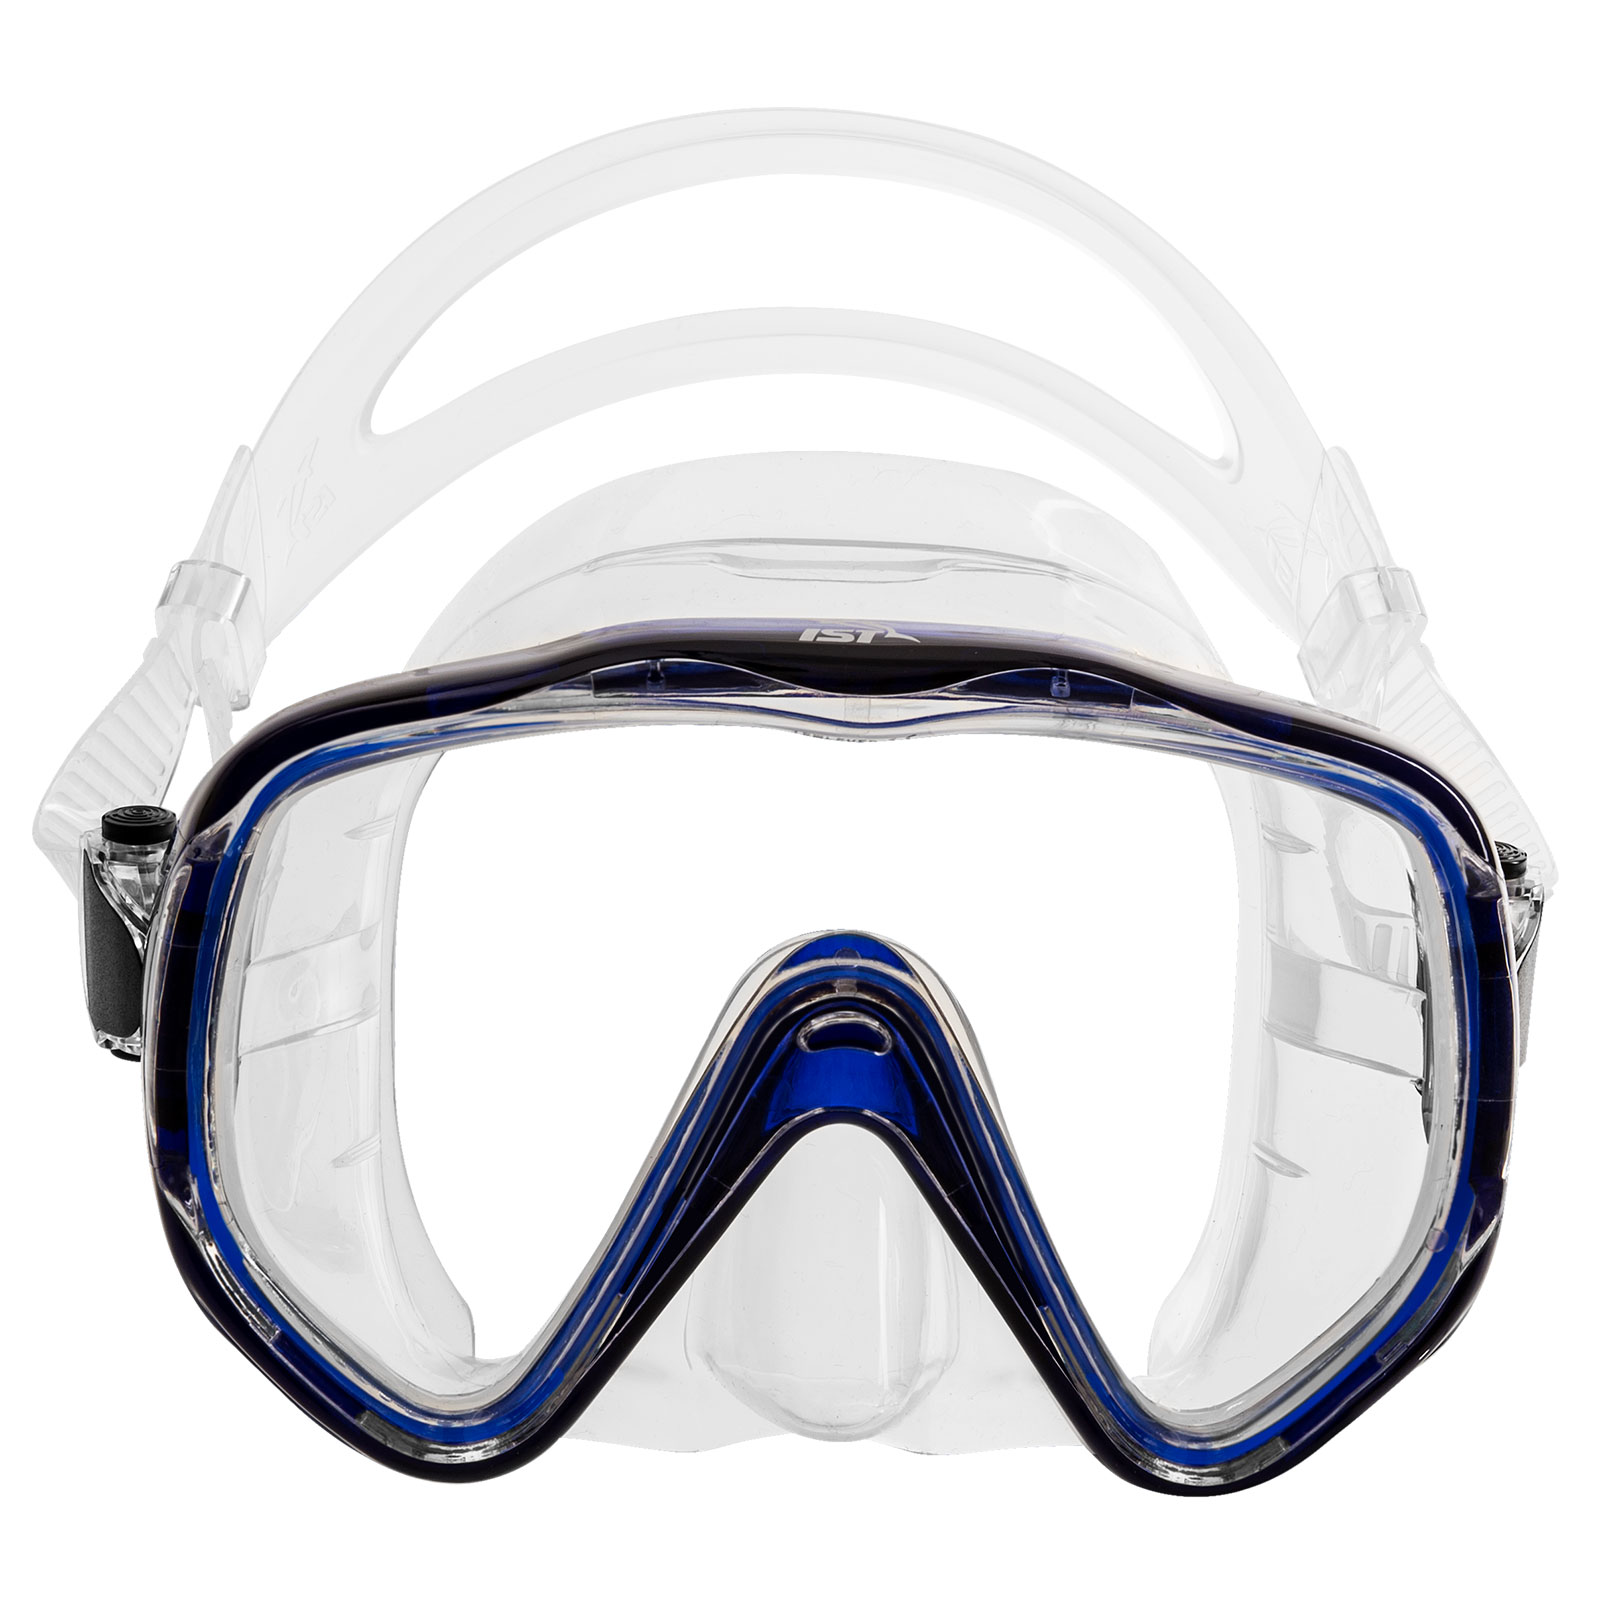 Details about   IST Imperial Panoramic View Hands-Free Water Clearance Mask 